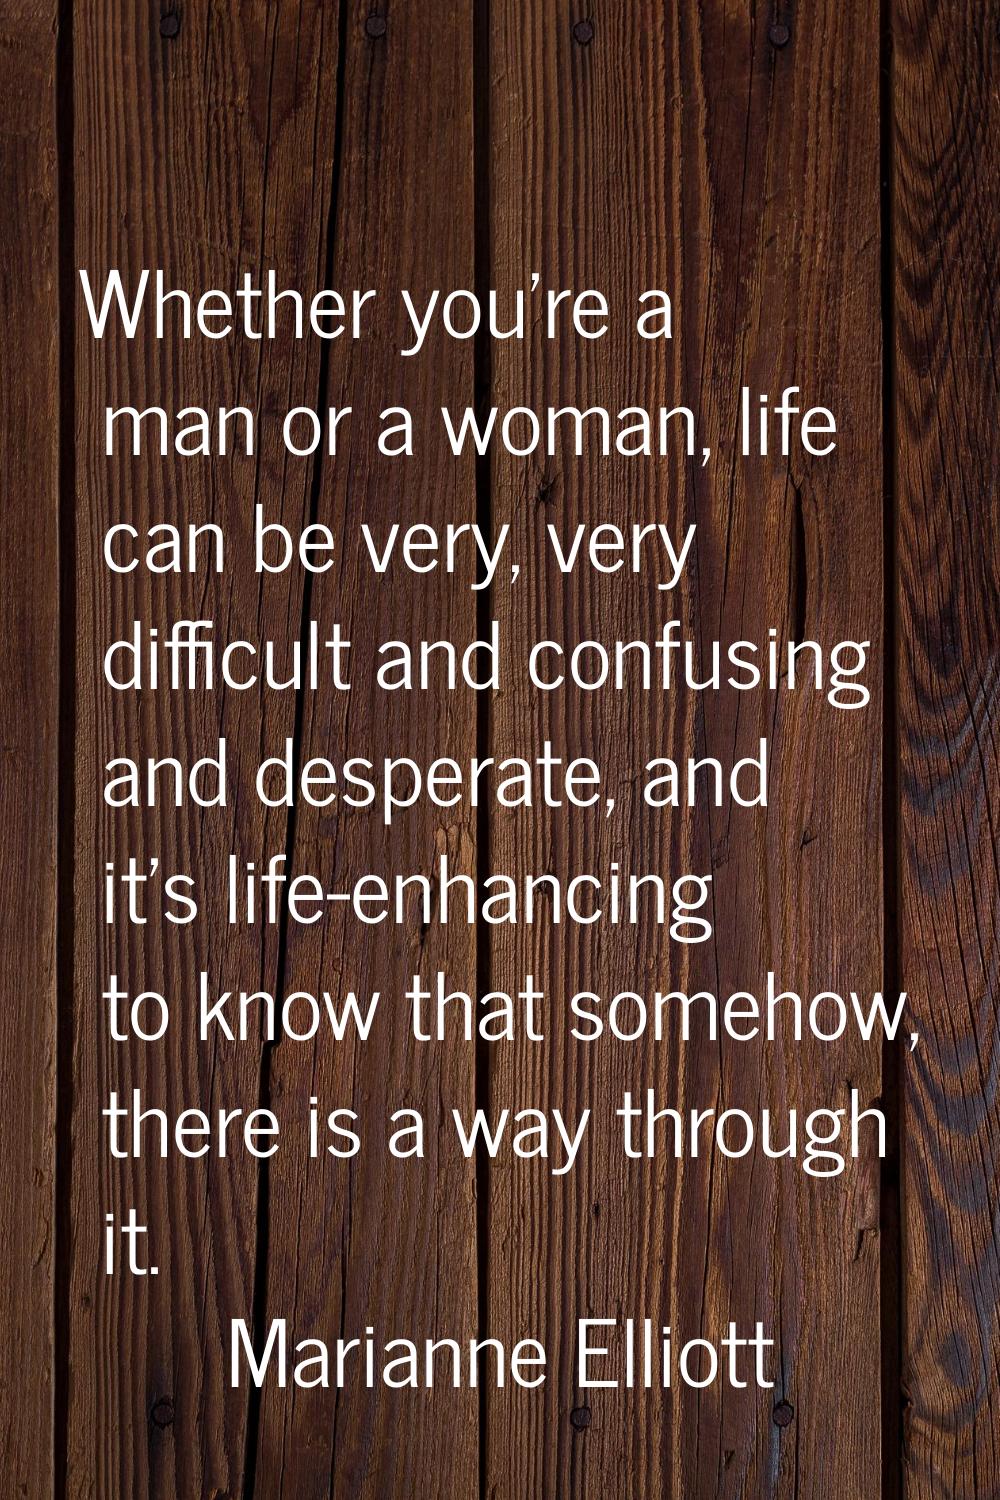 Whether you're a man or a woman, life can be very, very difficult and confusing and desperate, and 